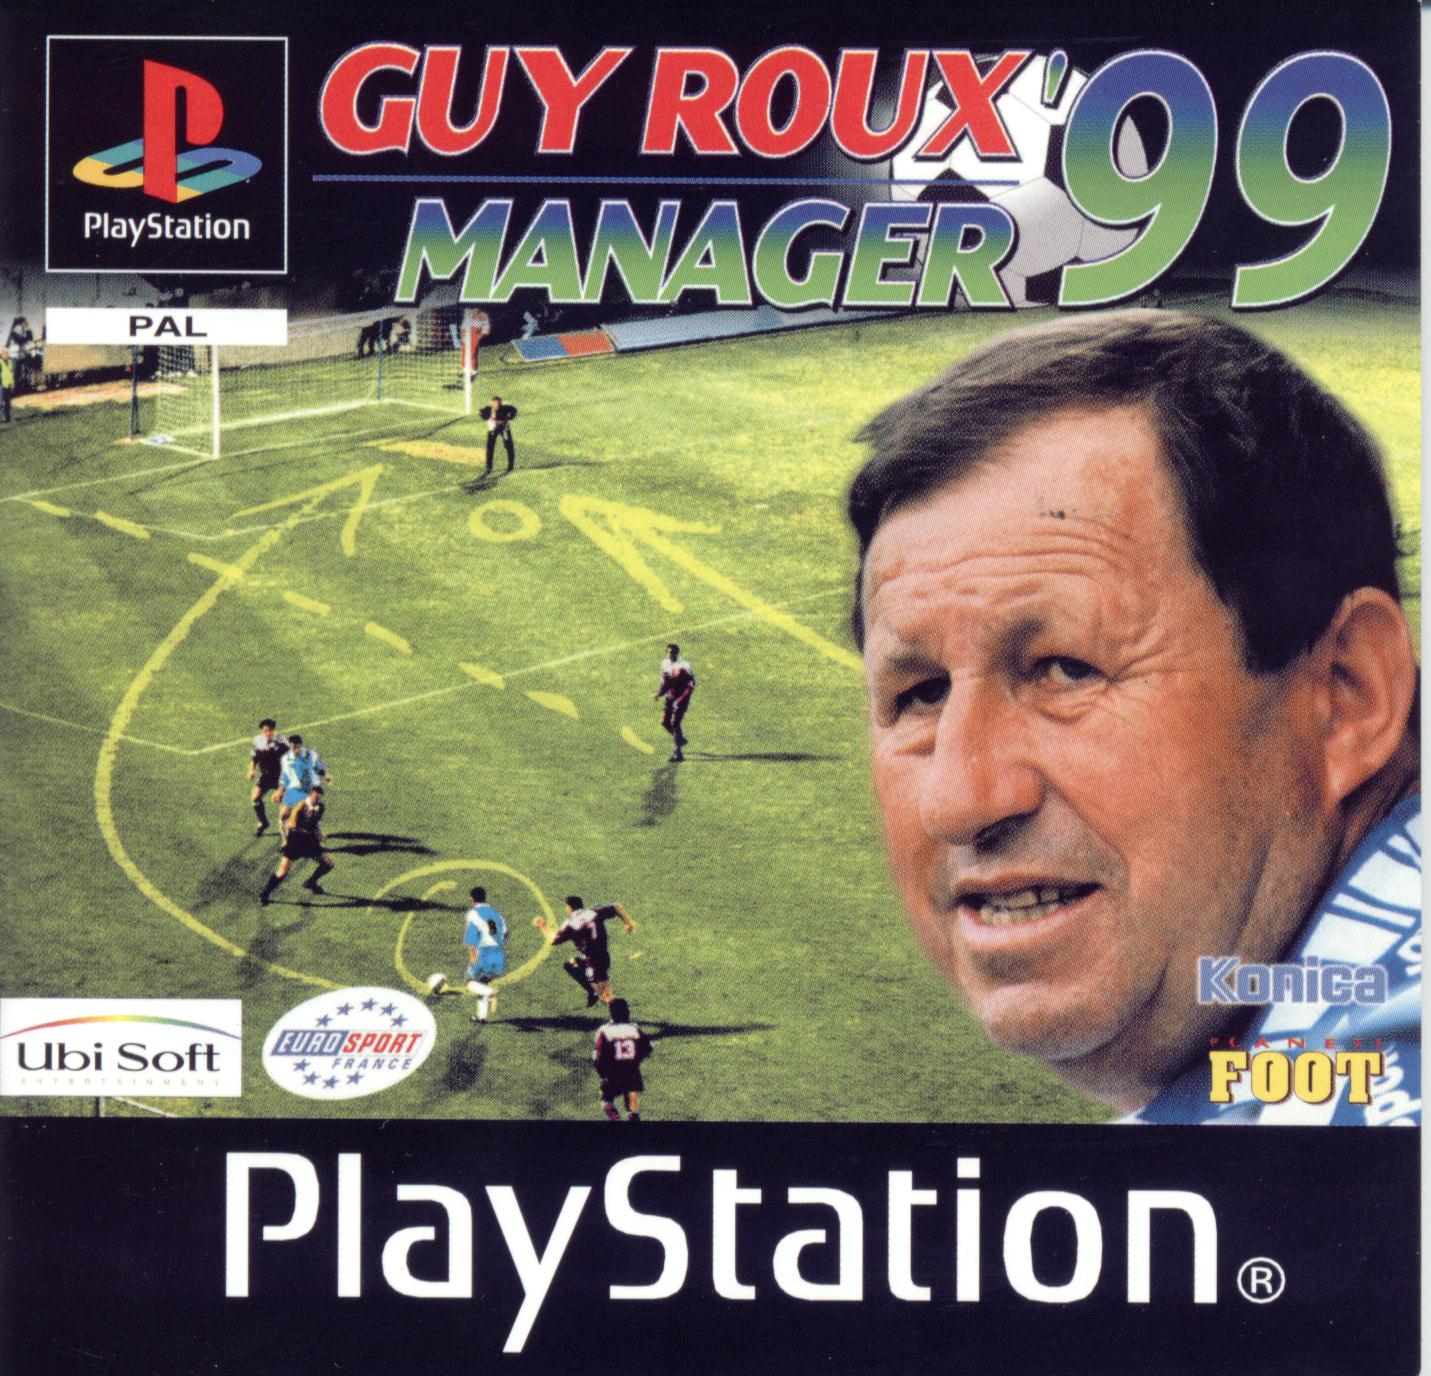 Guy_Roux_Manager_99_Pal.jpg